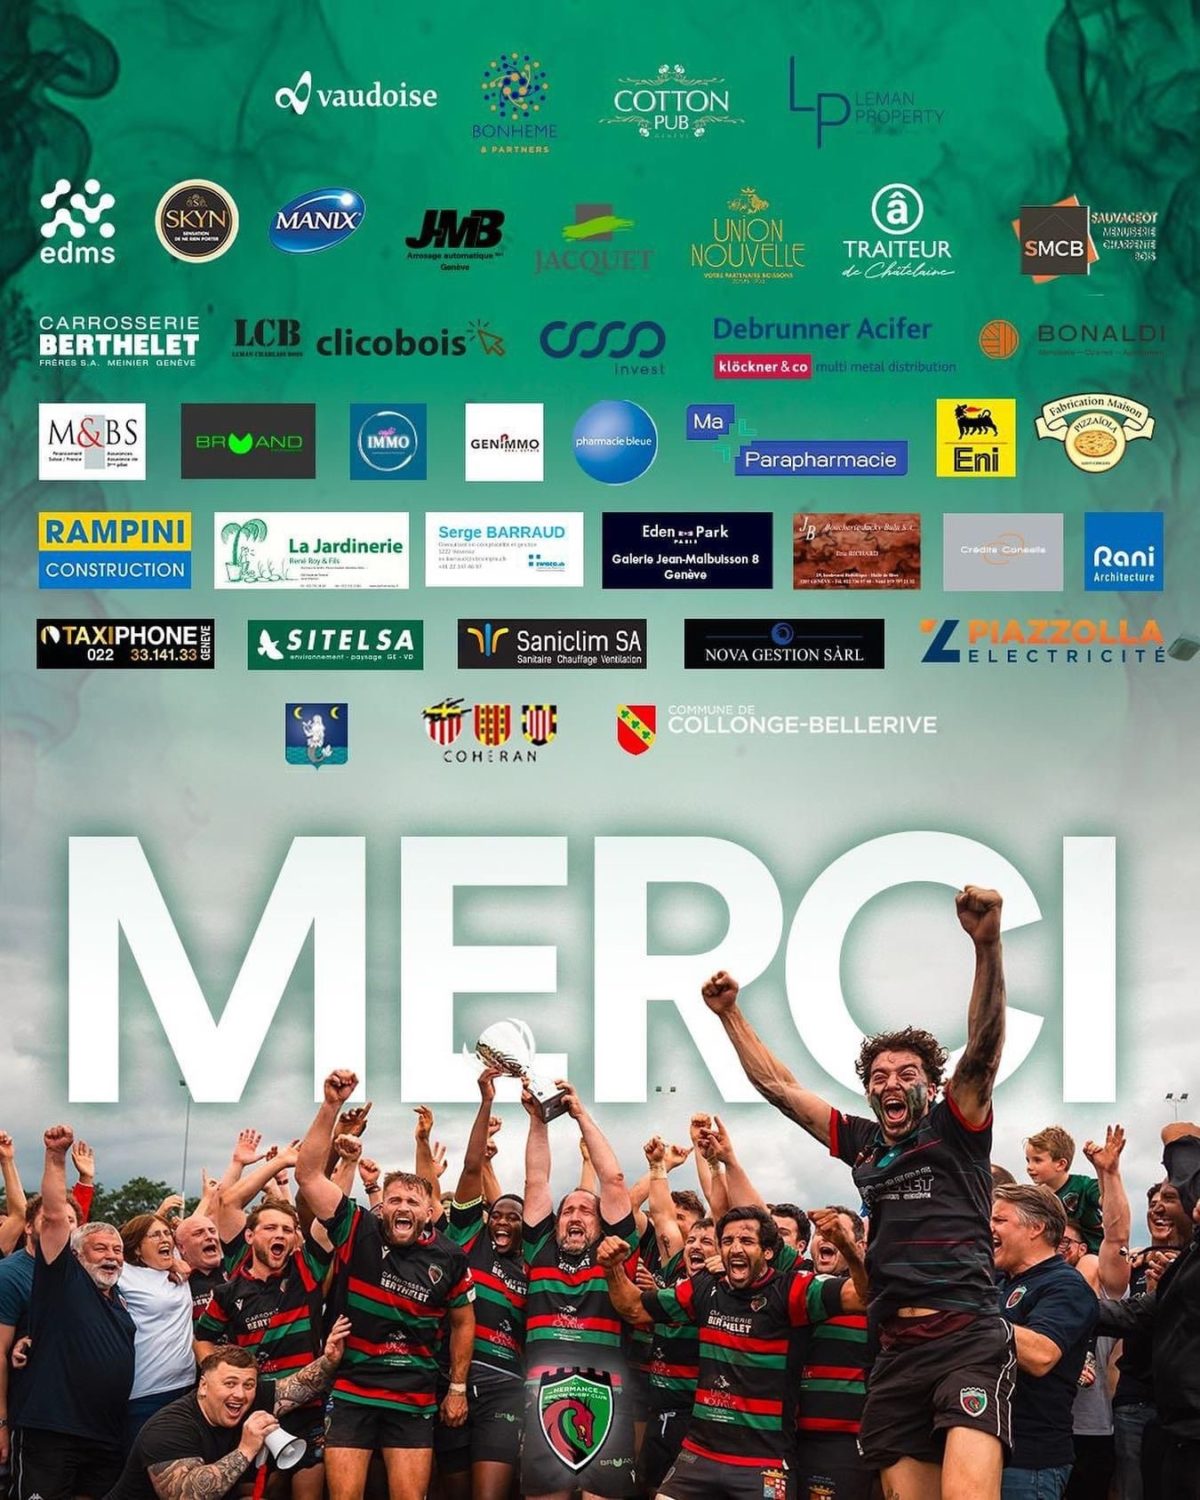 EDMS supporte le Hermance Région Rugby Club ! // 28.06.24